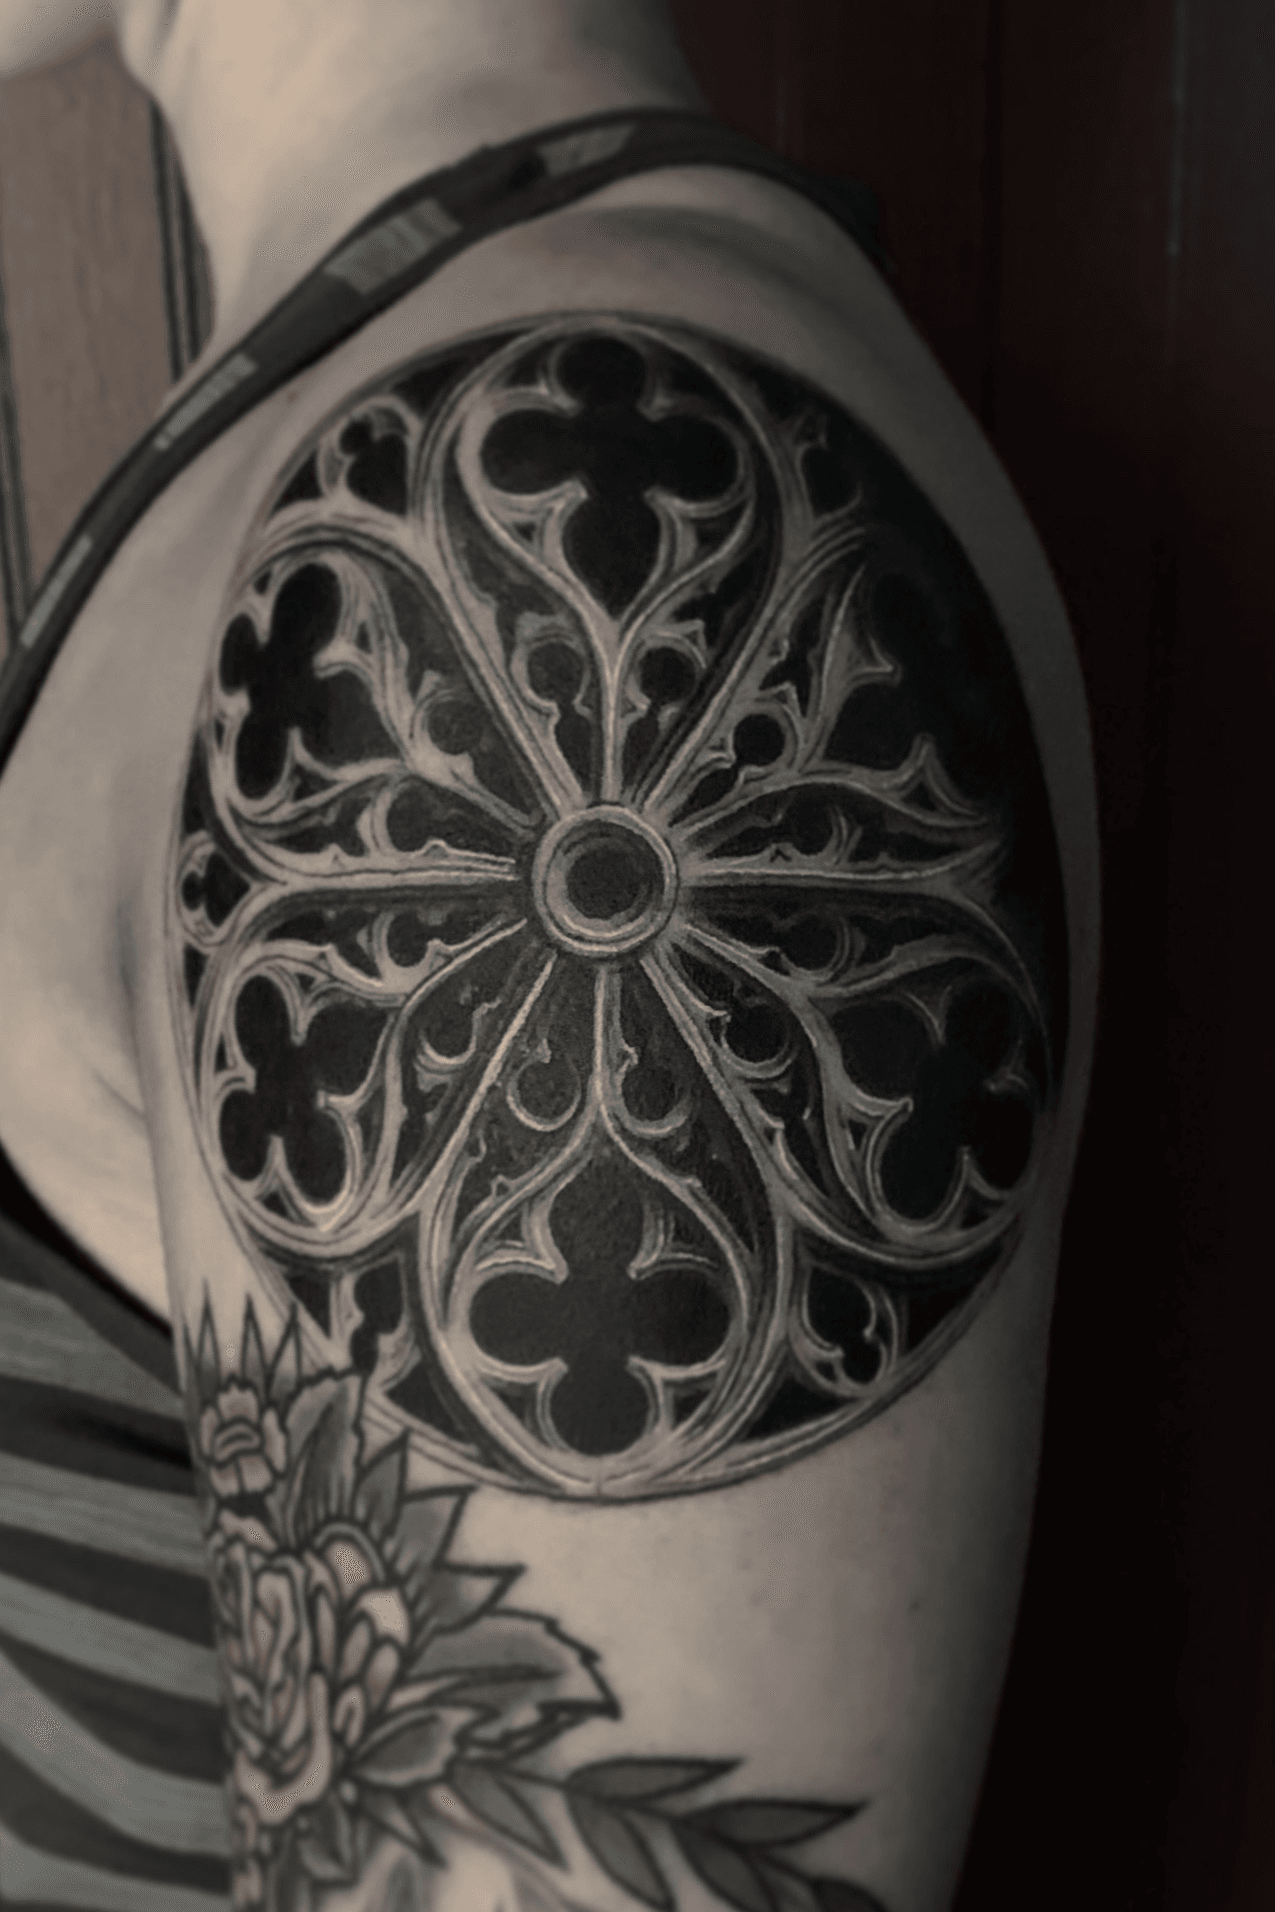 Tattoo uploaded by Ross Howerton  A realistic eye meshed into a cathedrals  rose window via Mumia IGmumia916 architectural blackandgrey cathedral  eyeball Mumia realism surrealism  Tattoodo